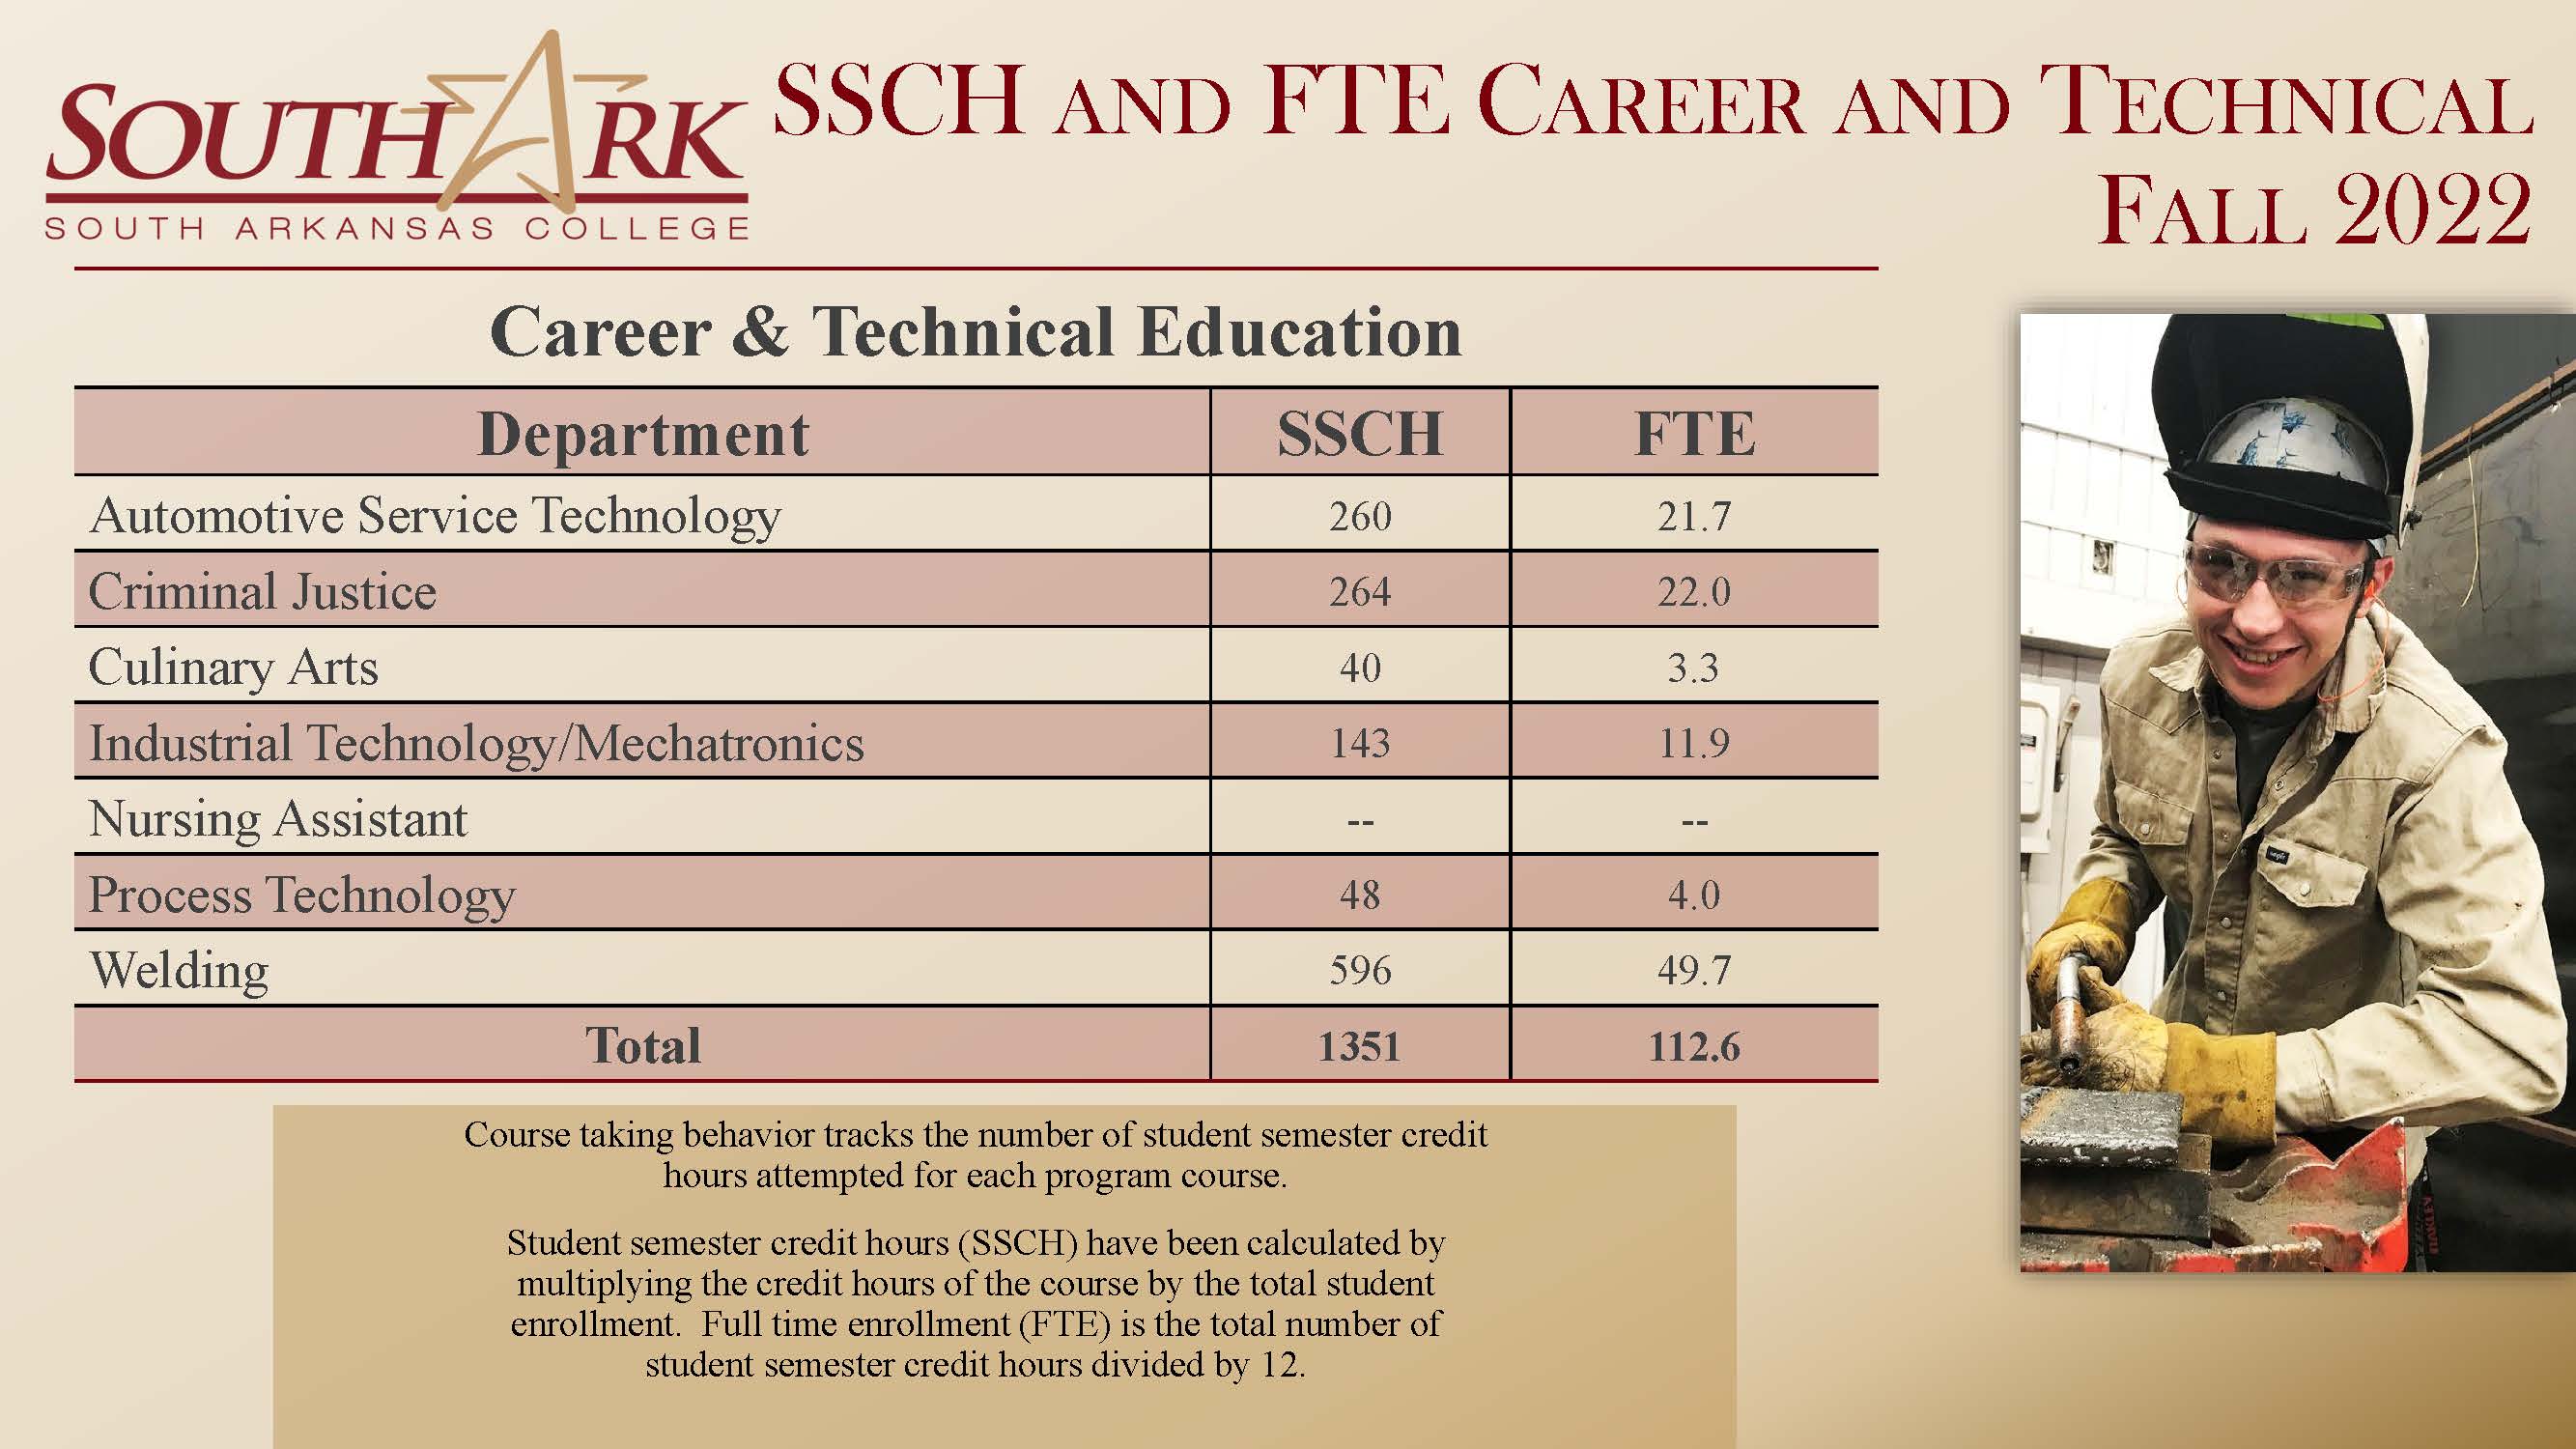 SSCH / FTE for Career & Technical Education Fall 2022